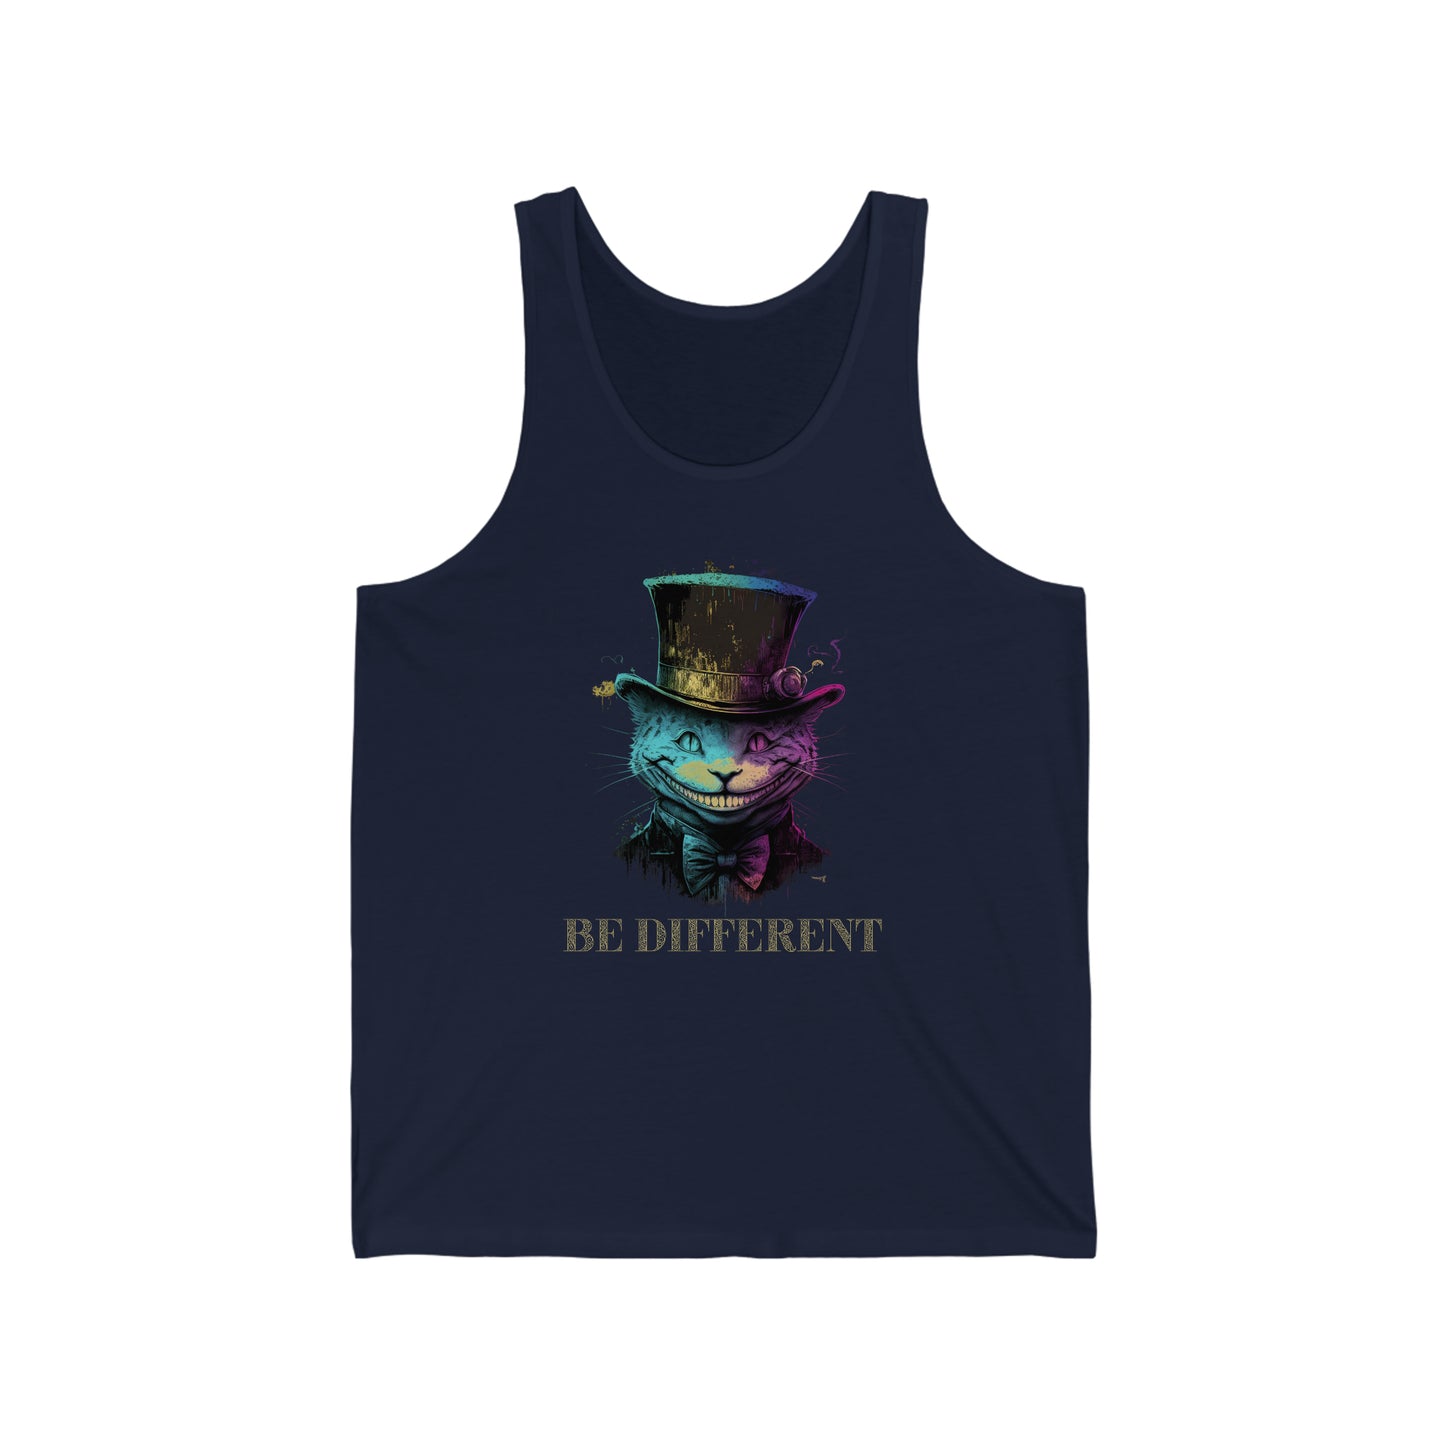 Be Different Unisex Jersey Tank